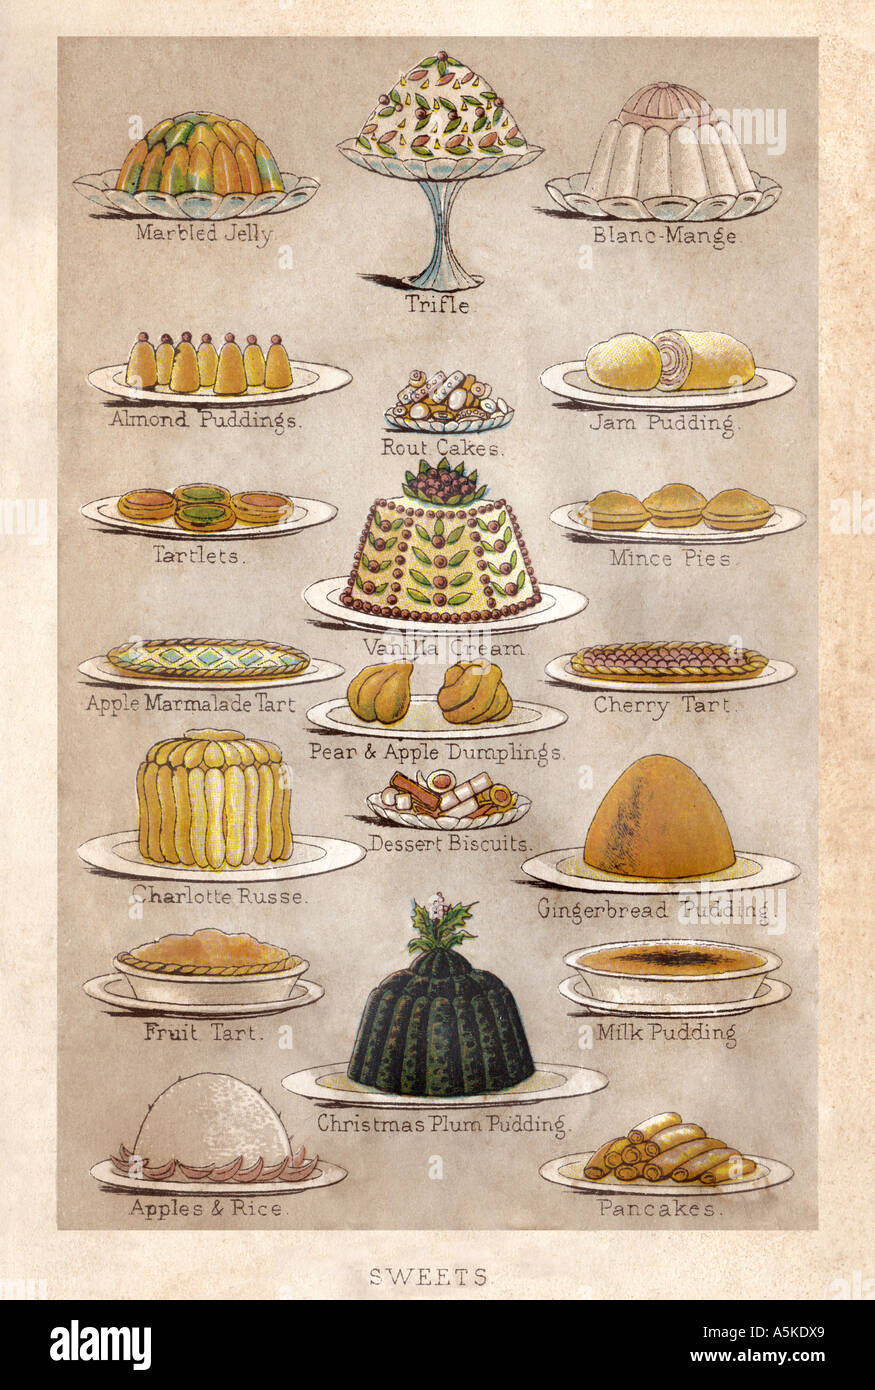 SWEETS Tinted illustration from Mrs Beetons Book of Household Management First published in 1861 Stock Photo